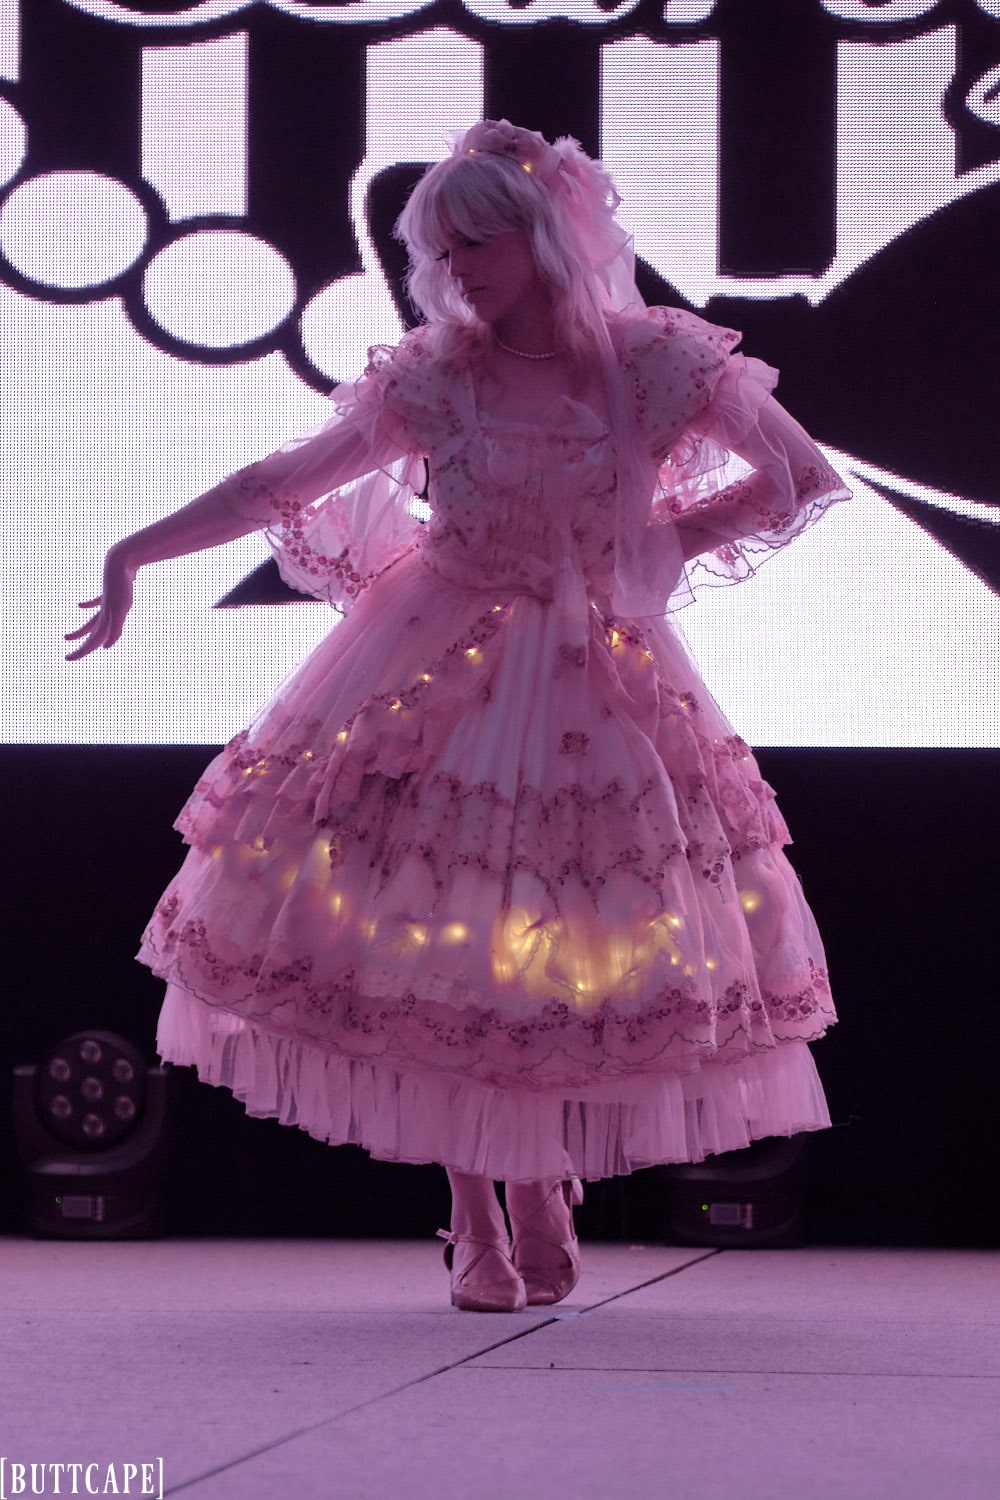 lolita model wearing lacy pink dress with LED lights in dark posing.